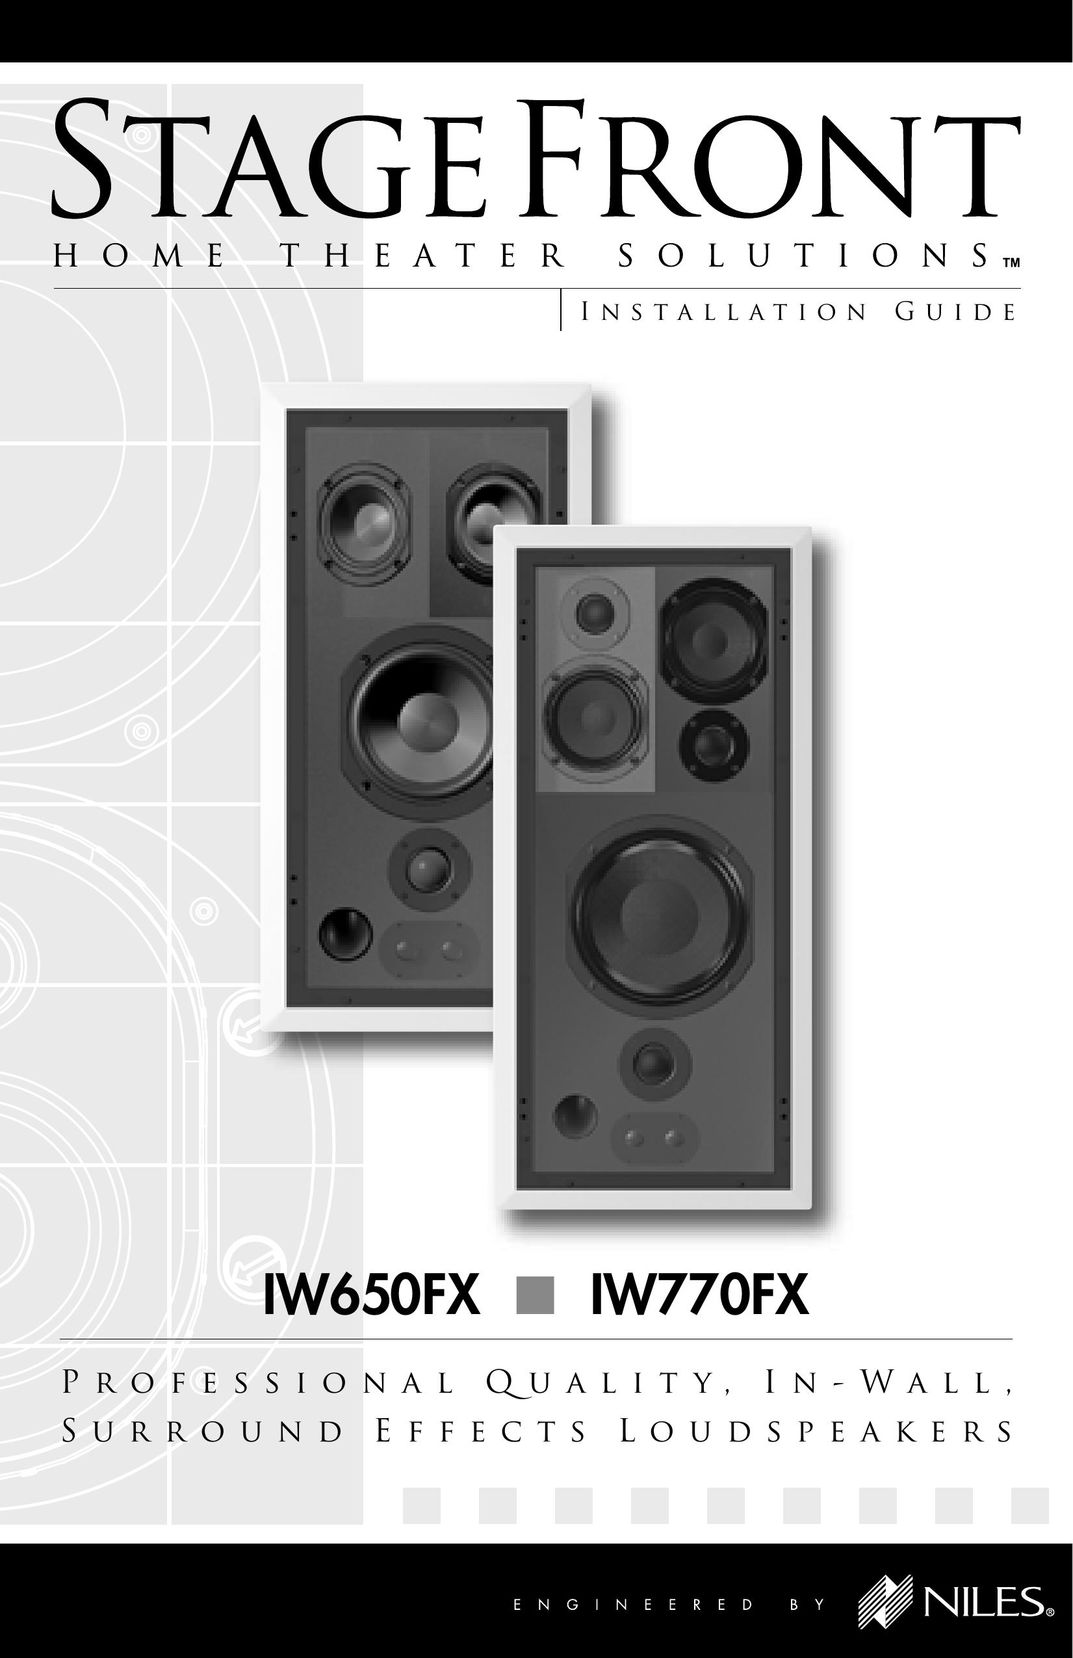 Niles Audio IW770FX Home Theater System User Manual